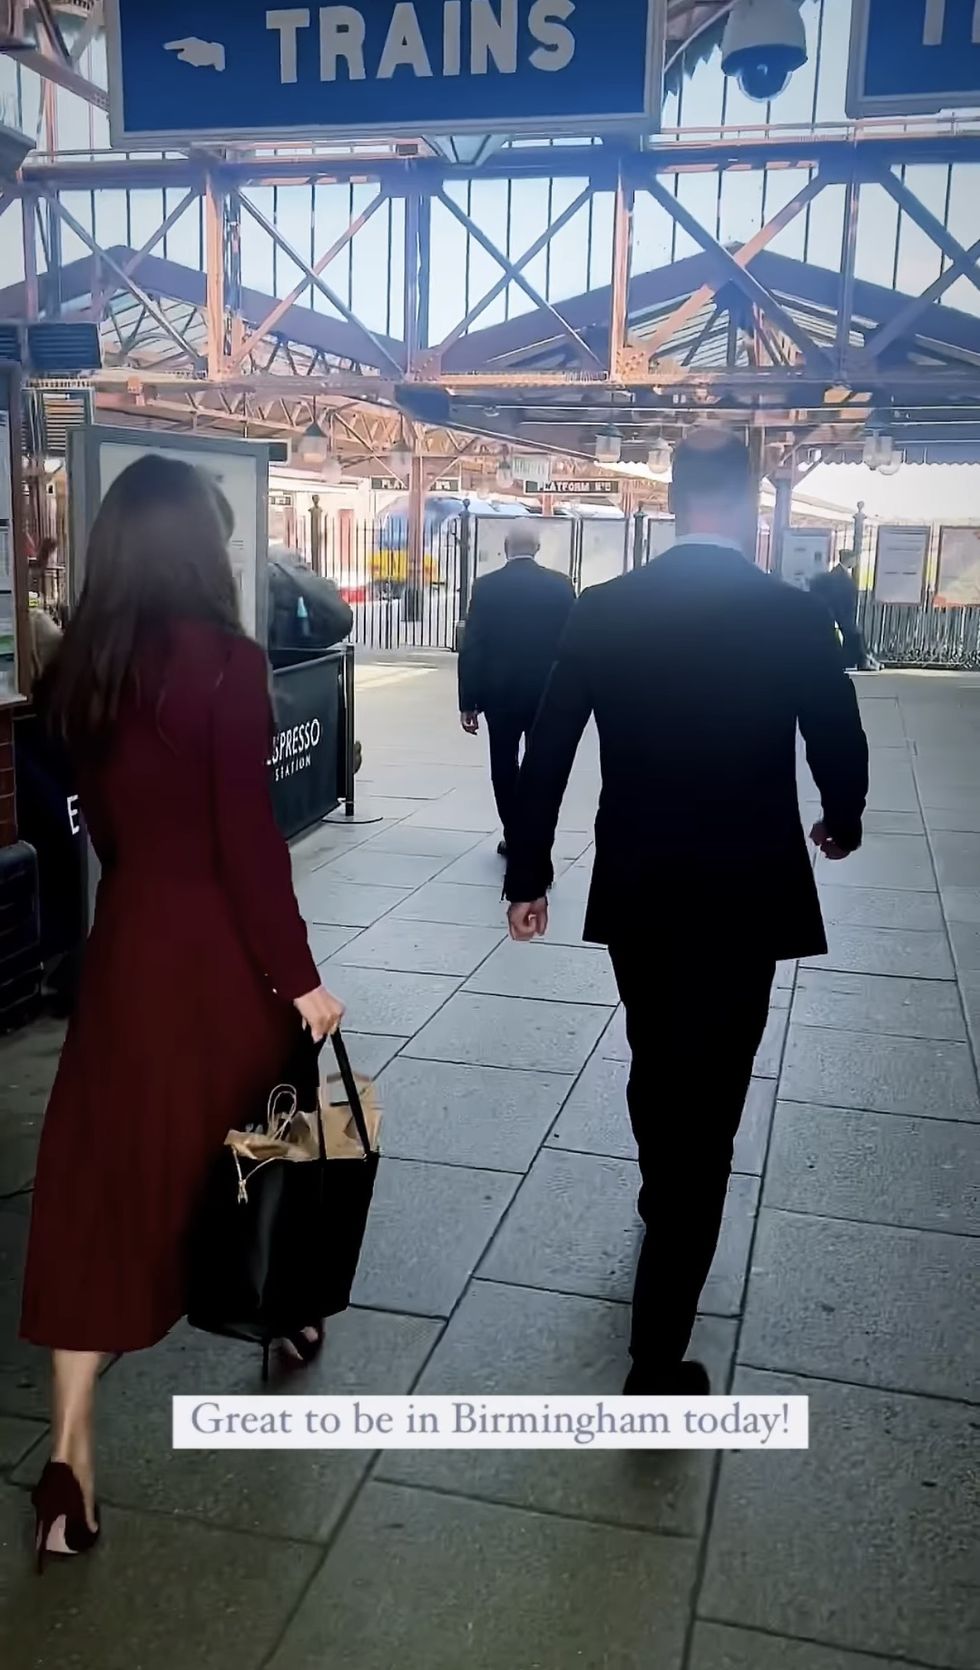 Kate Middleton Carried the Instagram It-Bag Twice This Week - PureWow